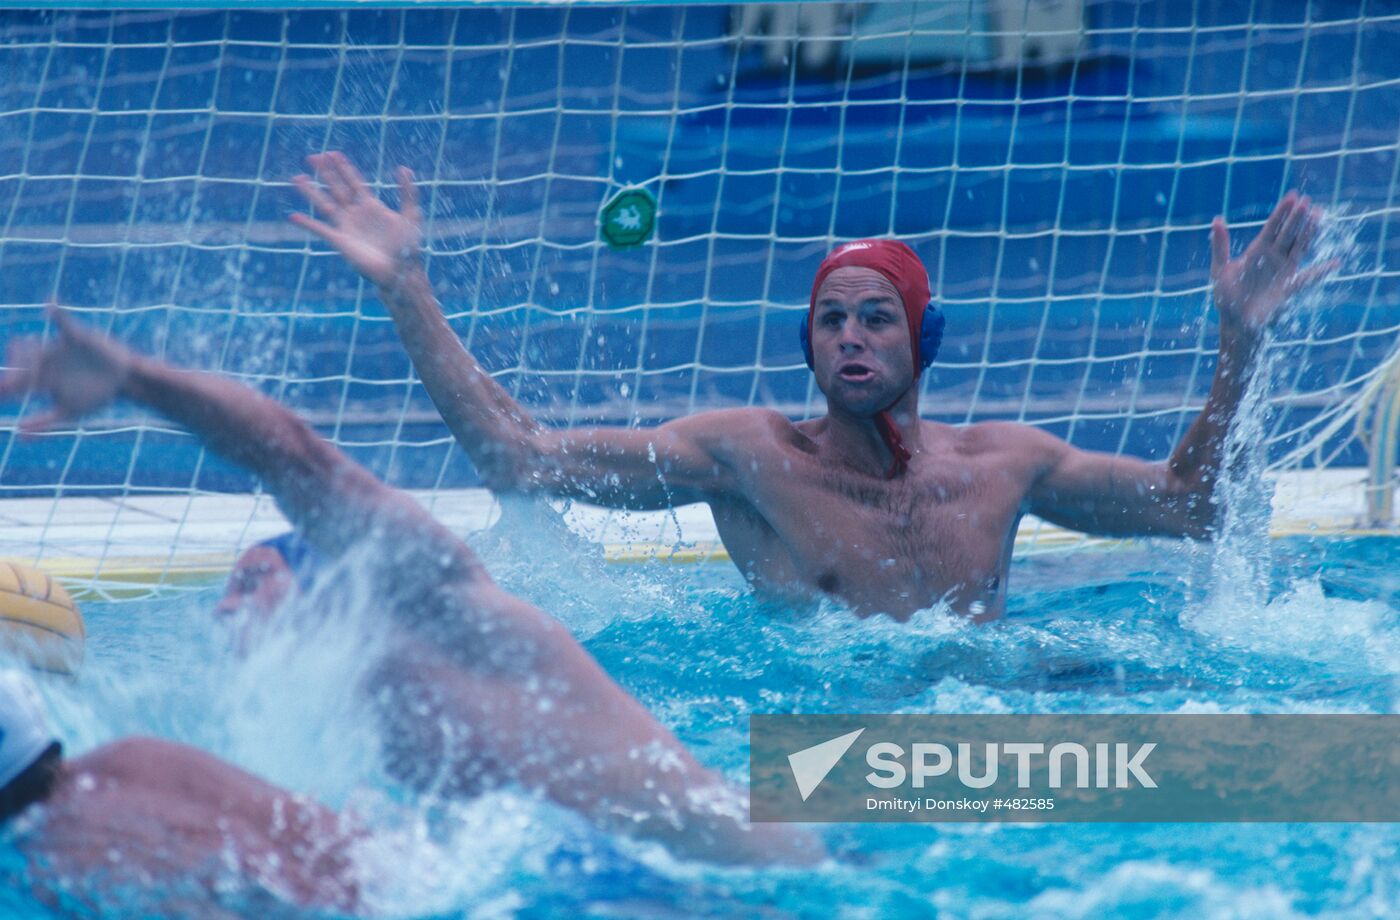 Water Polo. CIS vs. USA. Game for bronze medals